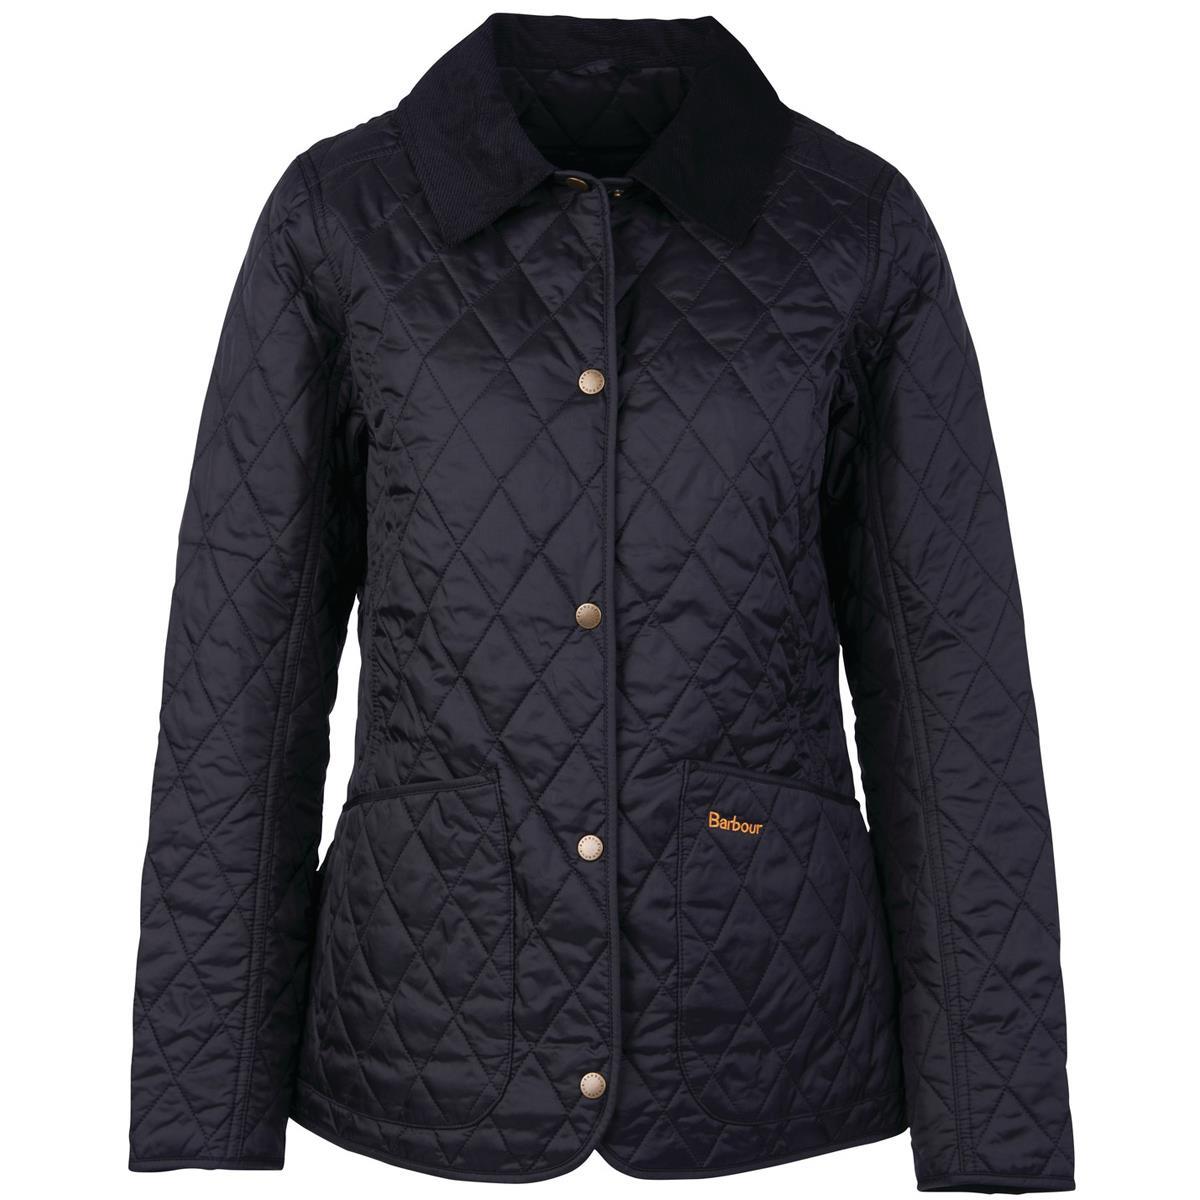 What is the recommended washing method for the Barbour Annandale Quilted Jacket?